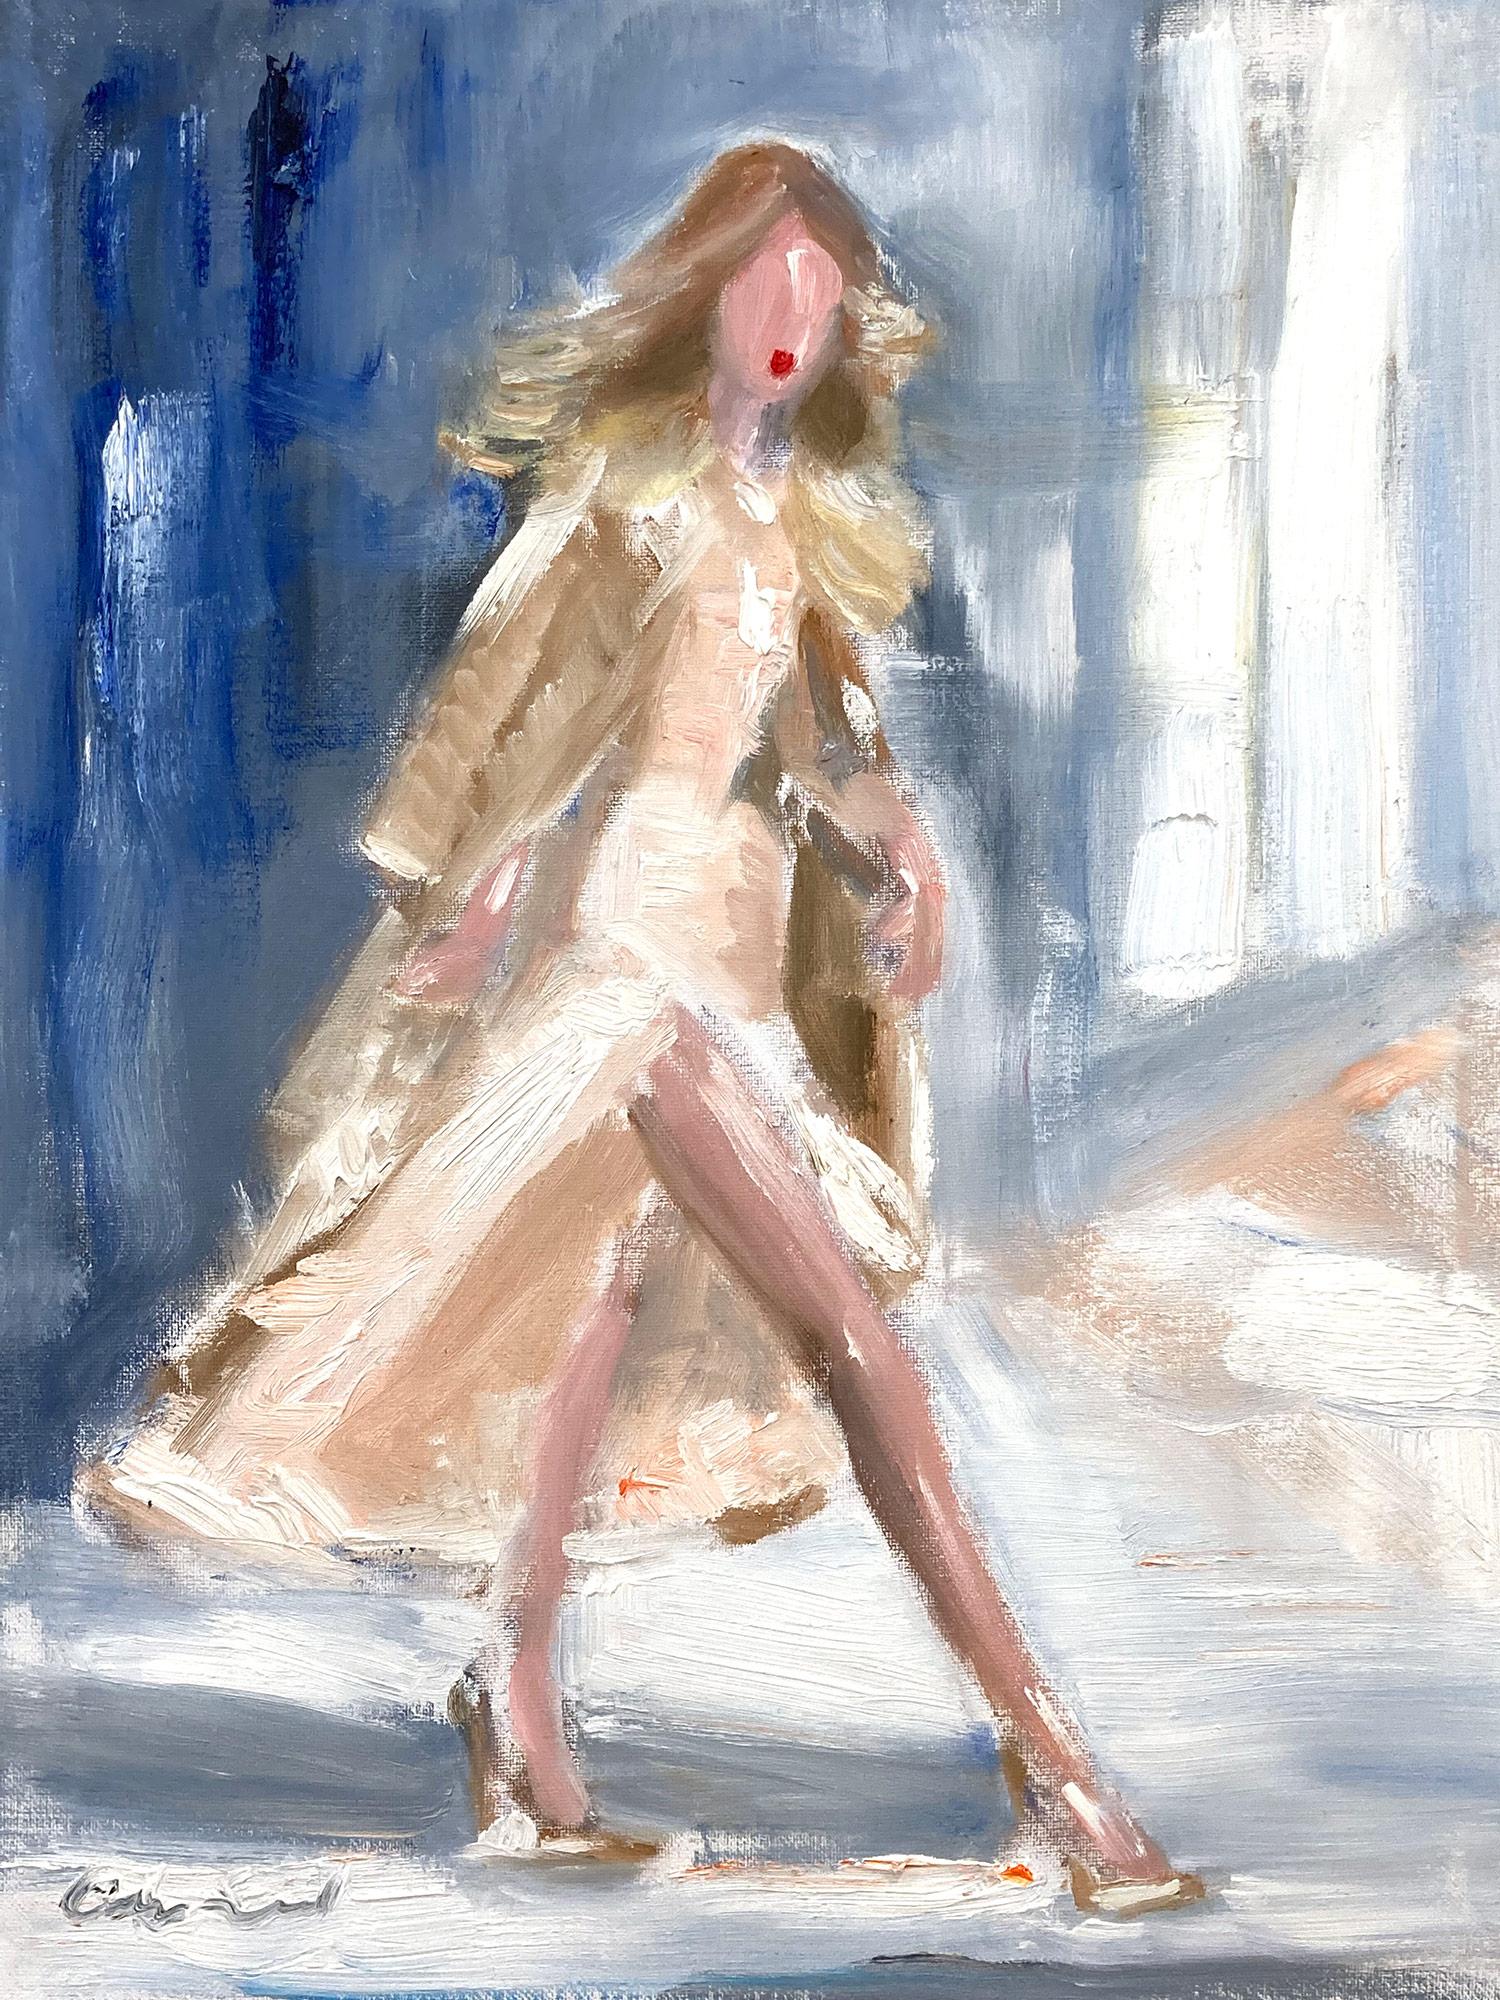 Cindy Shaoul Figurative Painting - "Stepping Out NYC" Impressionistic Oil Painting on Canvas Super Model Gigi Hadid